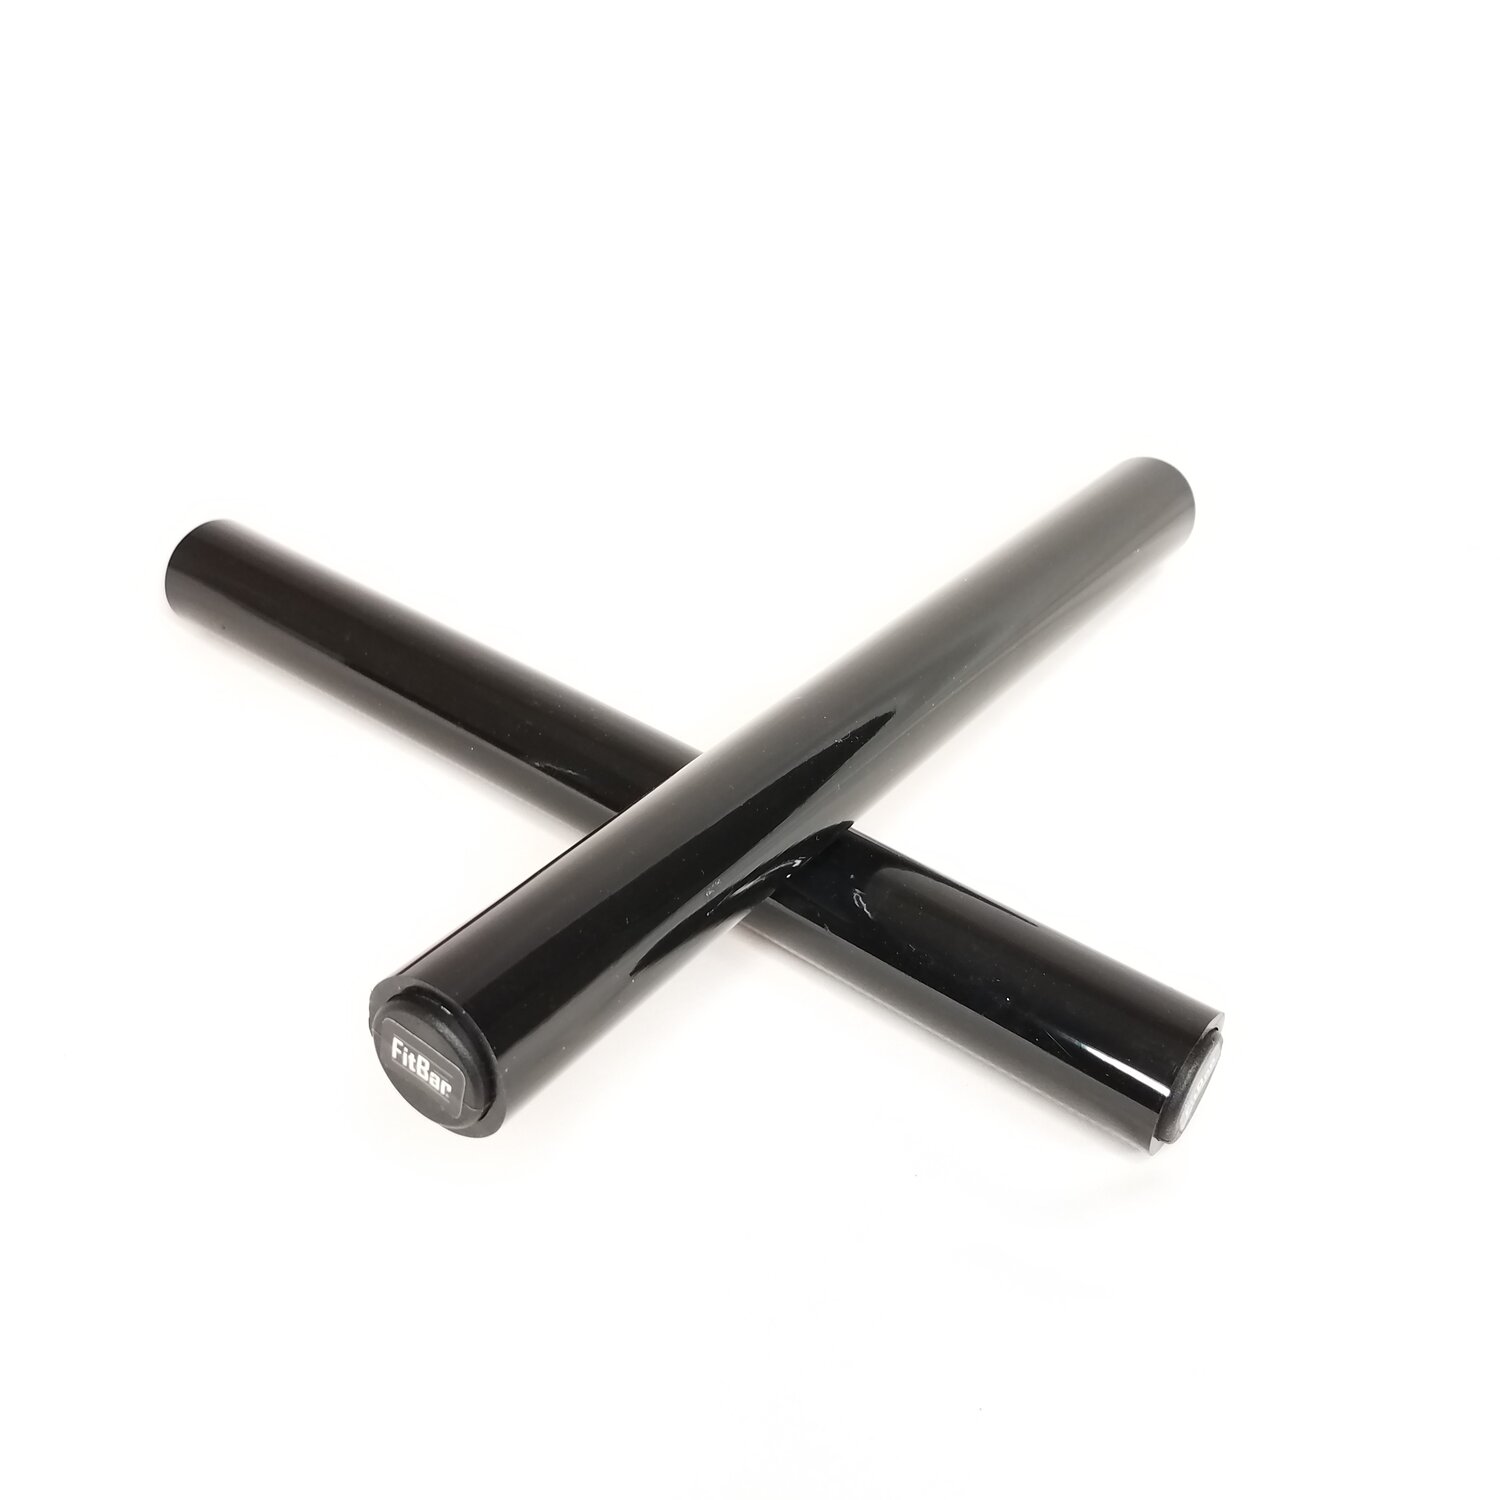 Rubber-Coated Dowels, Pair - FitBar Grip, Obstacle, Strength Equipment